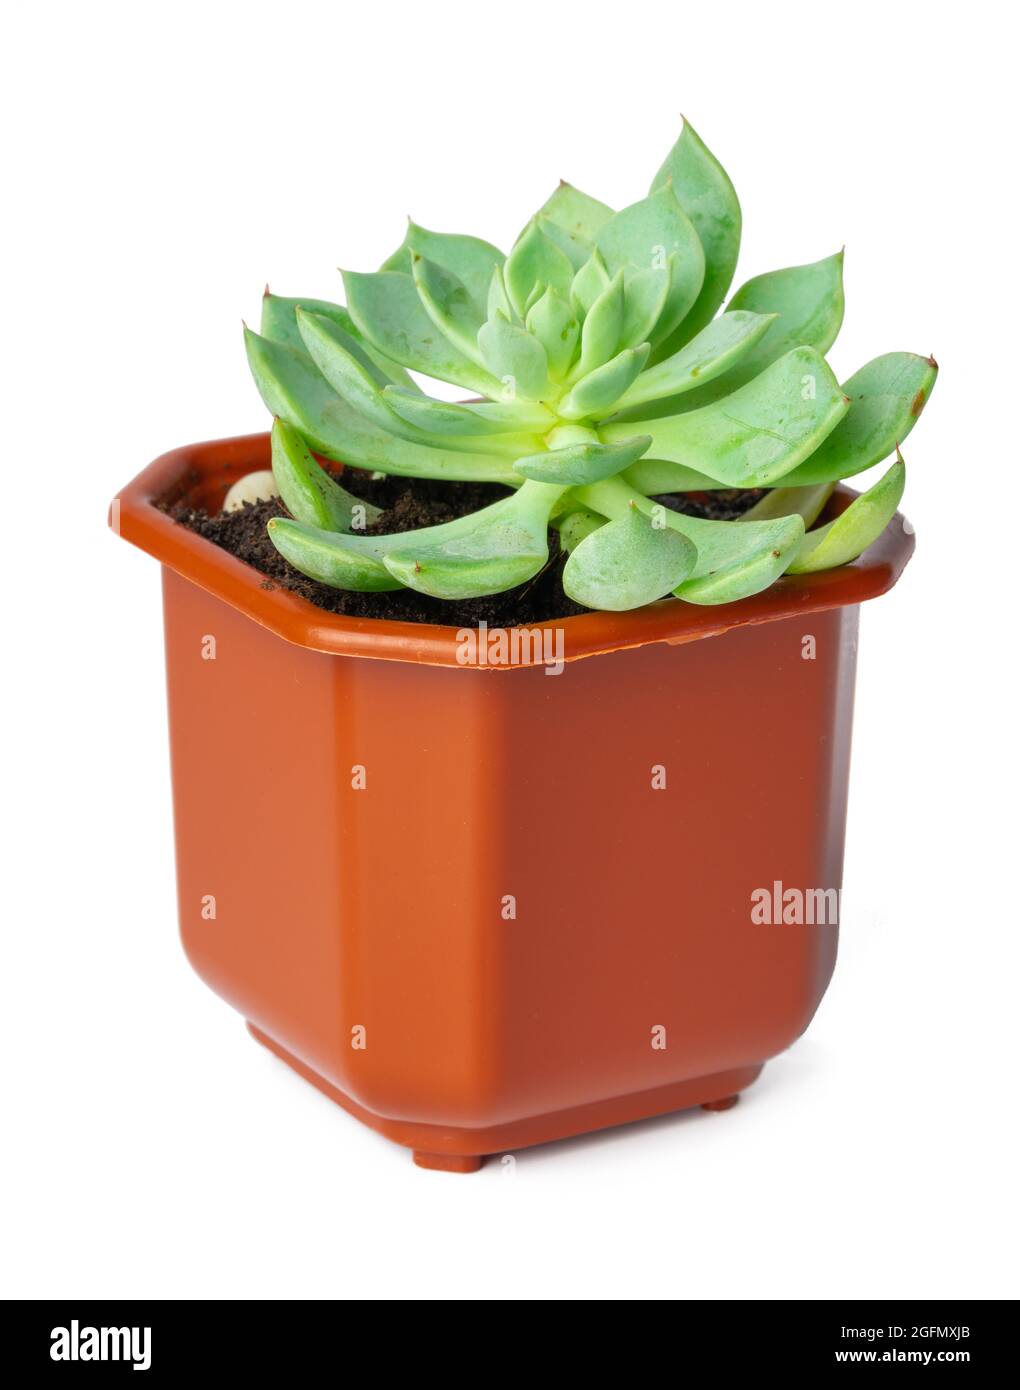 Potted succulent plant isolated on white background Stock Photo